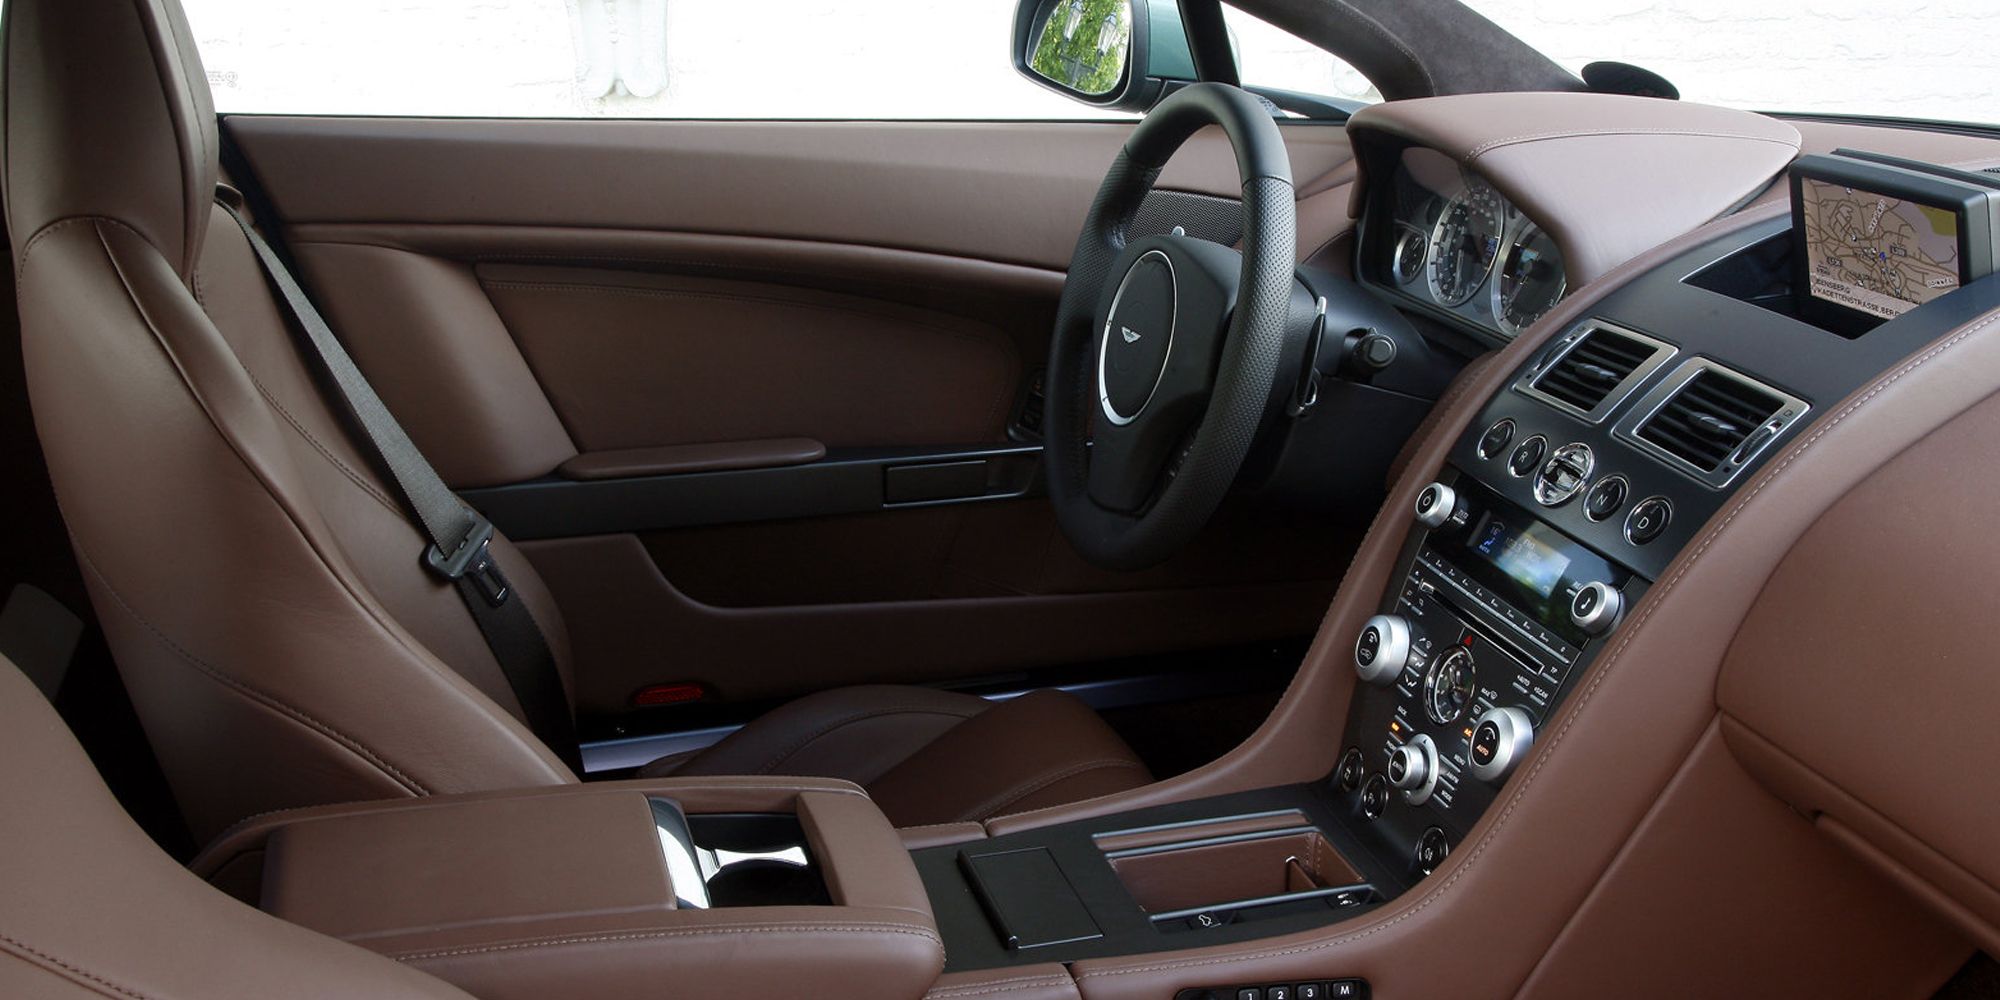 The interior of the V8 Vantage, brown leather